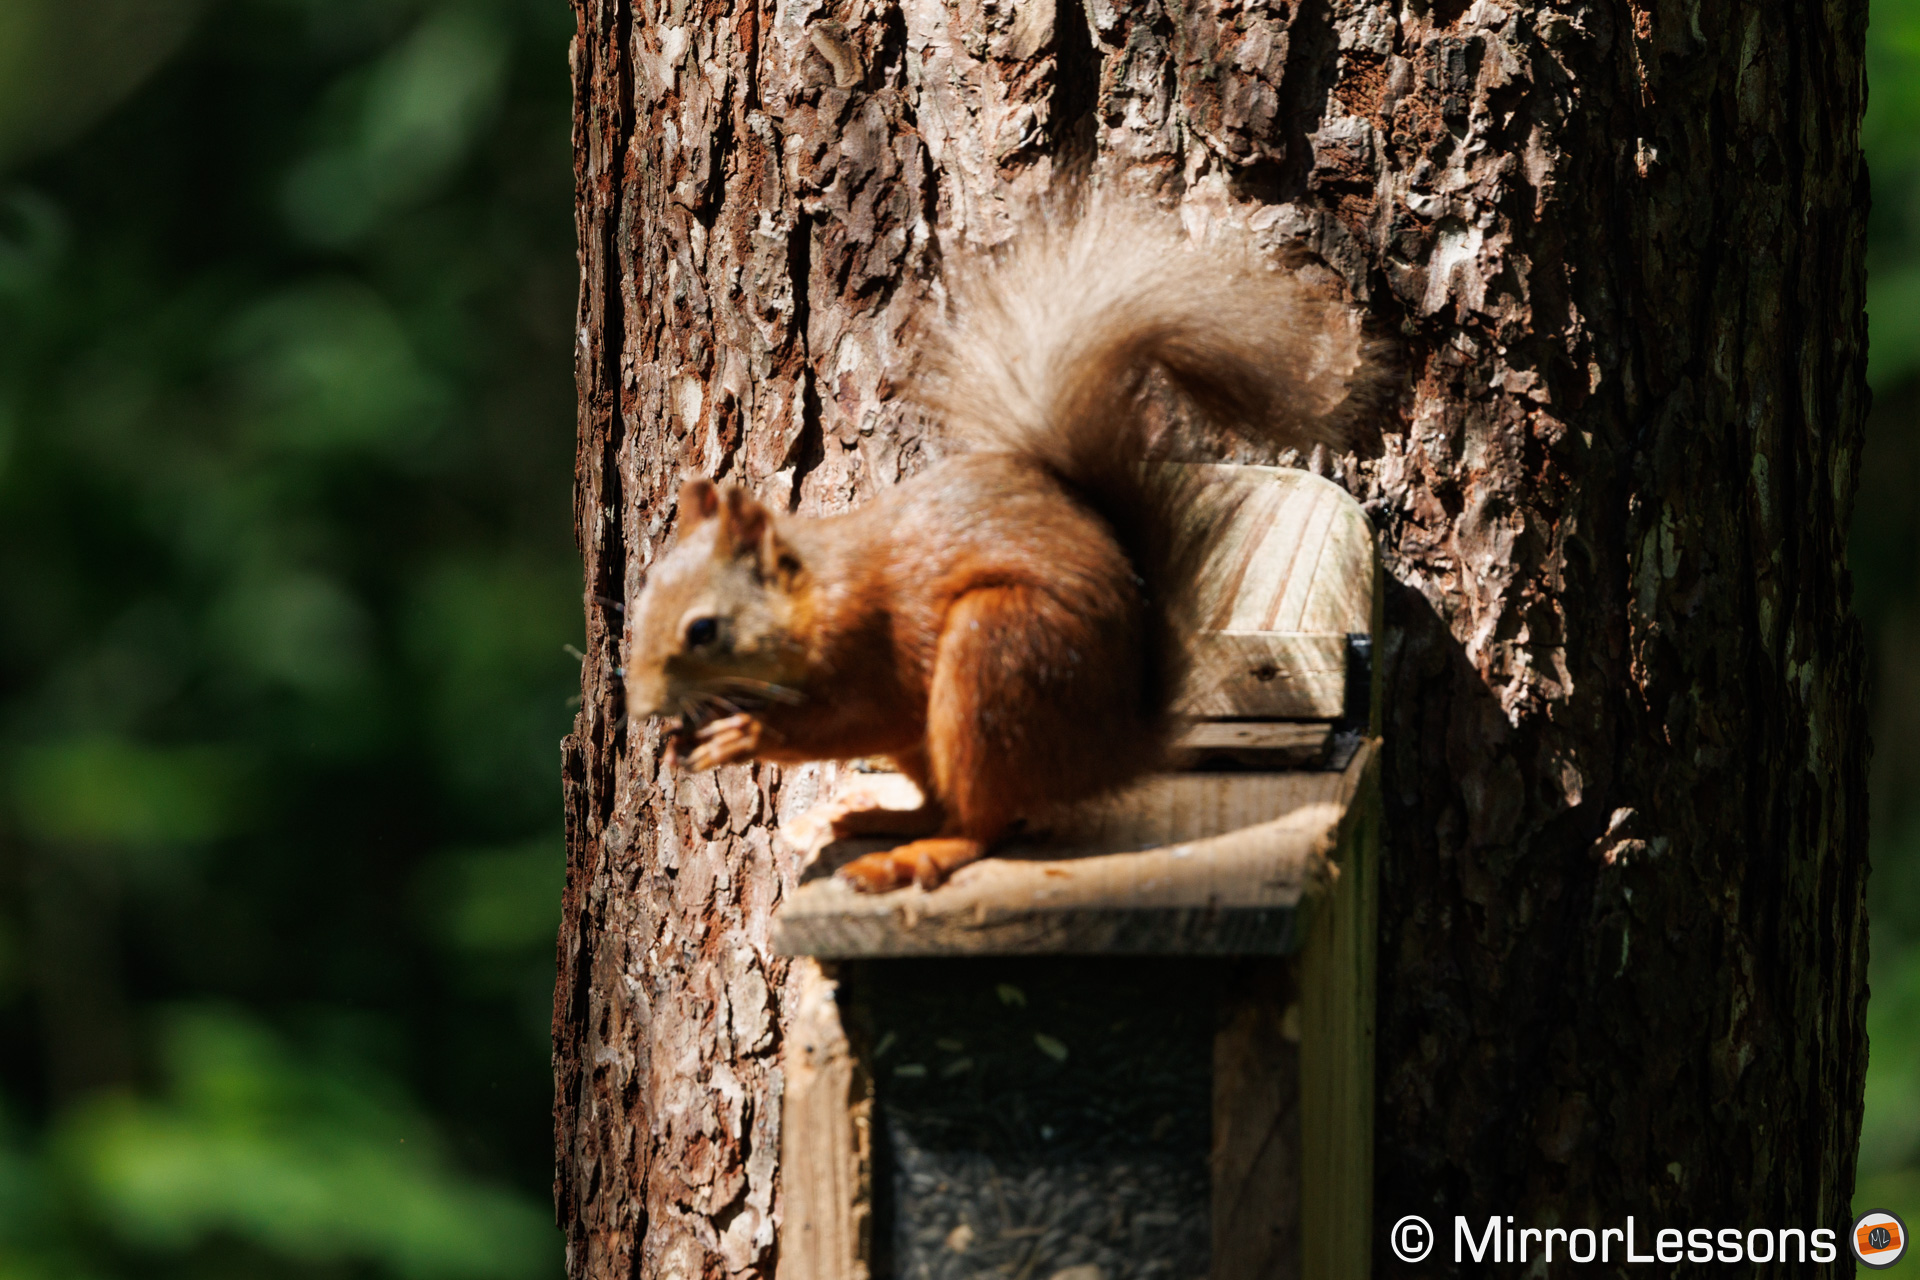 Red squirrel out of focus